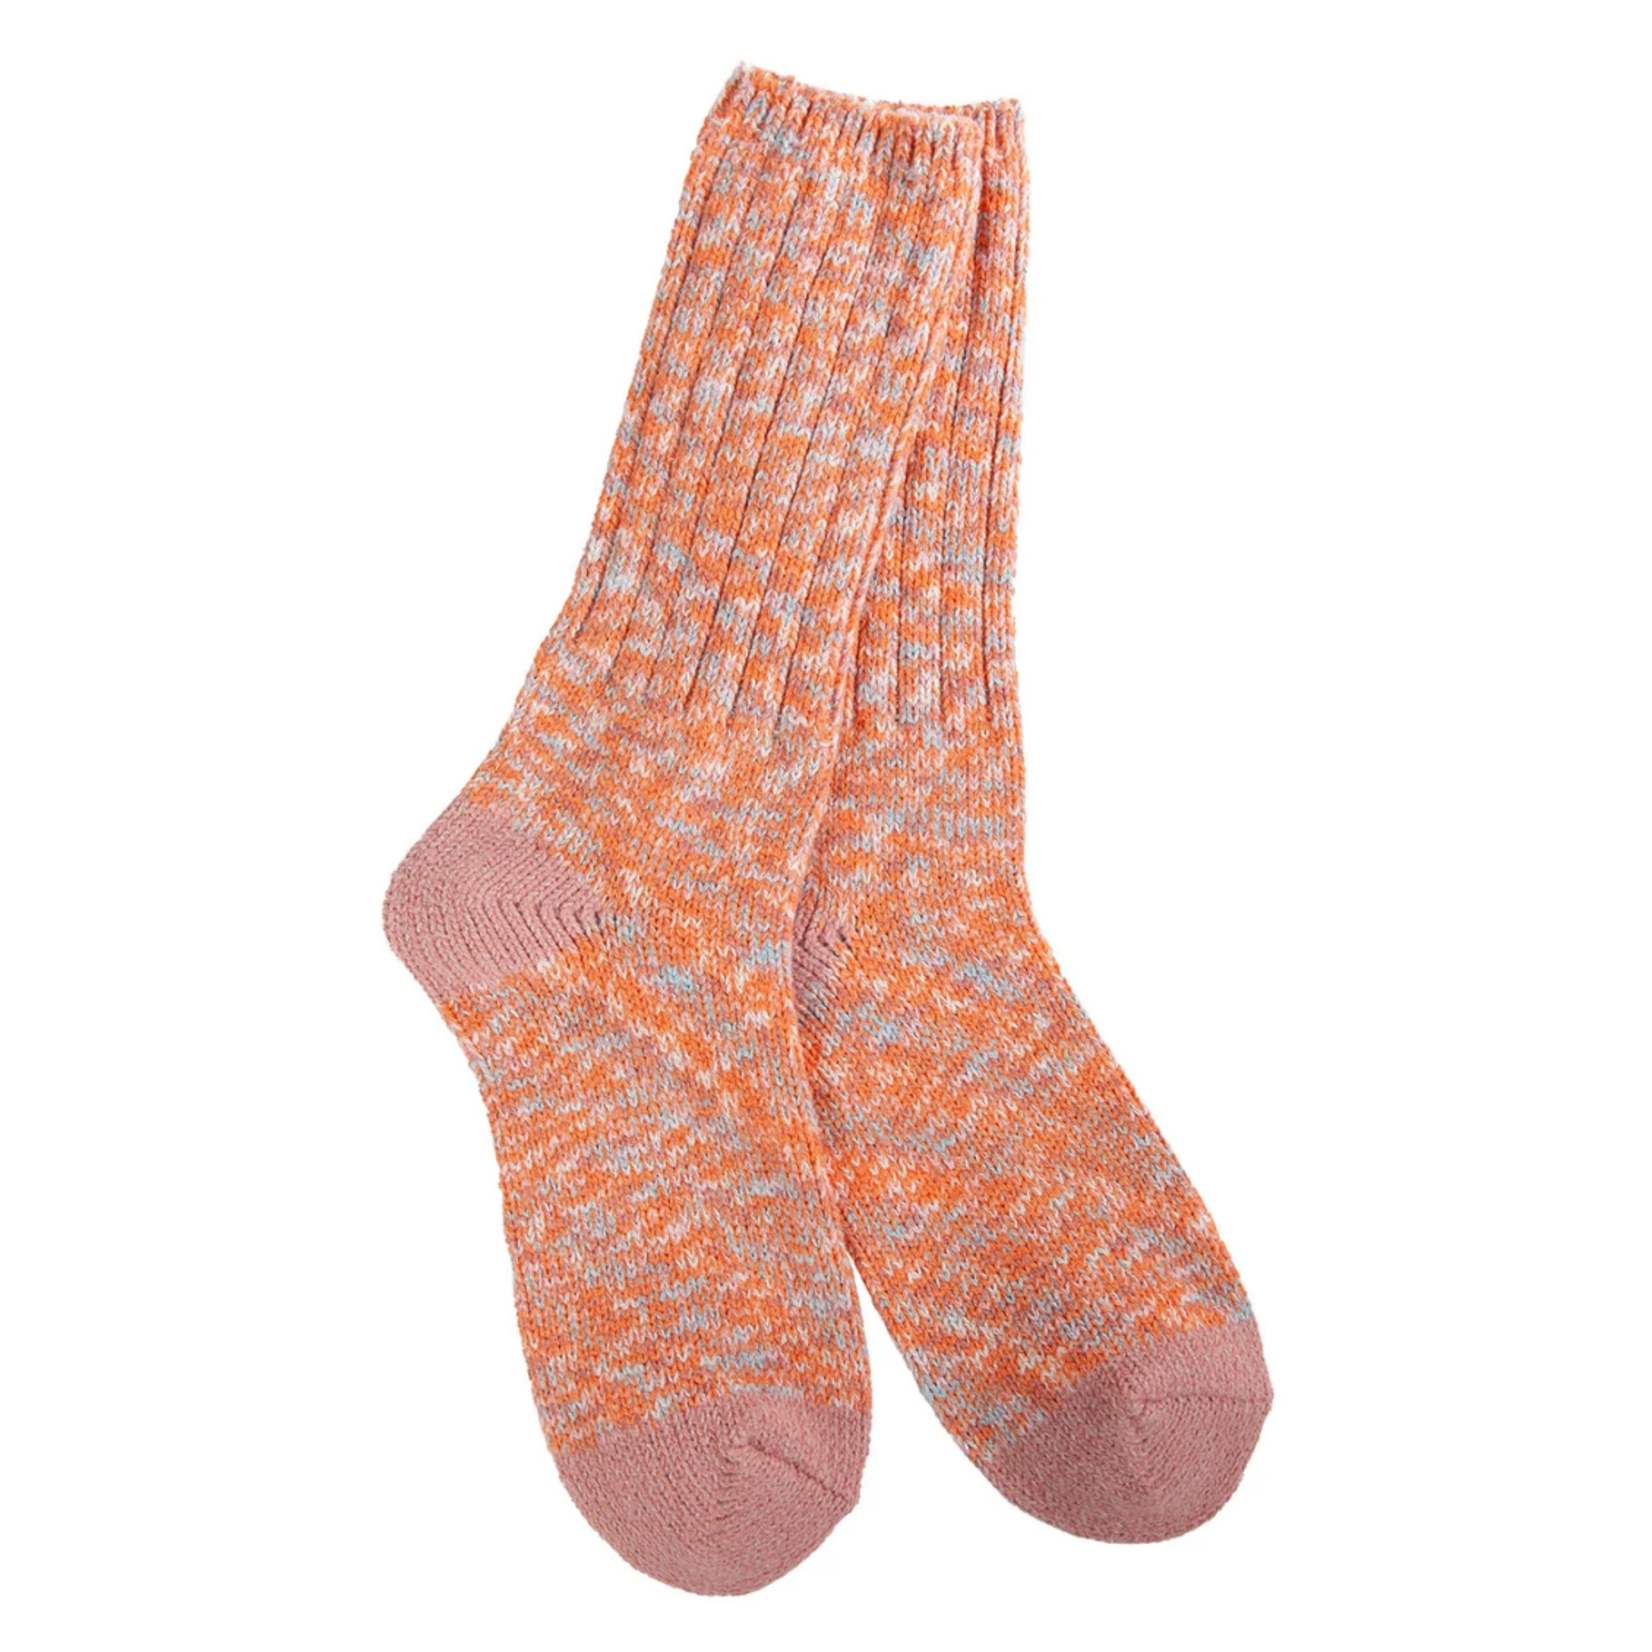 Crescent Sock Company Socks: Weekend Collection